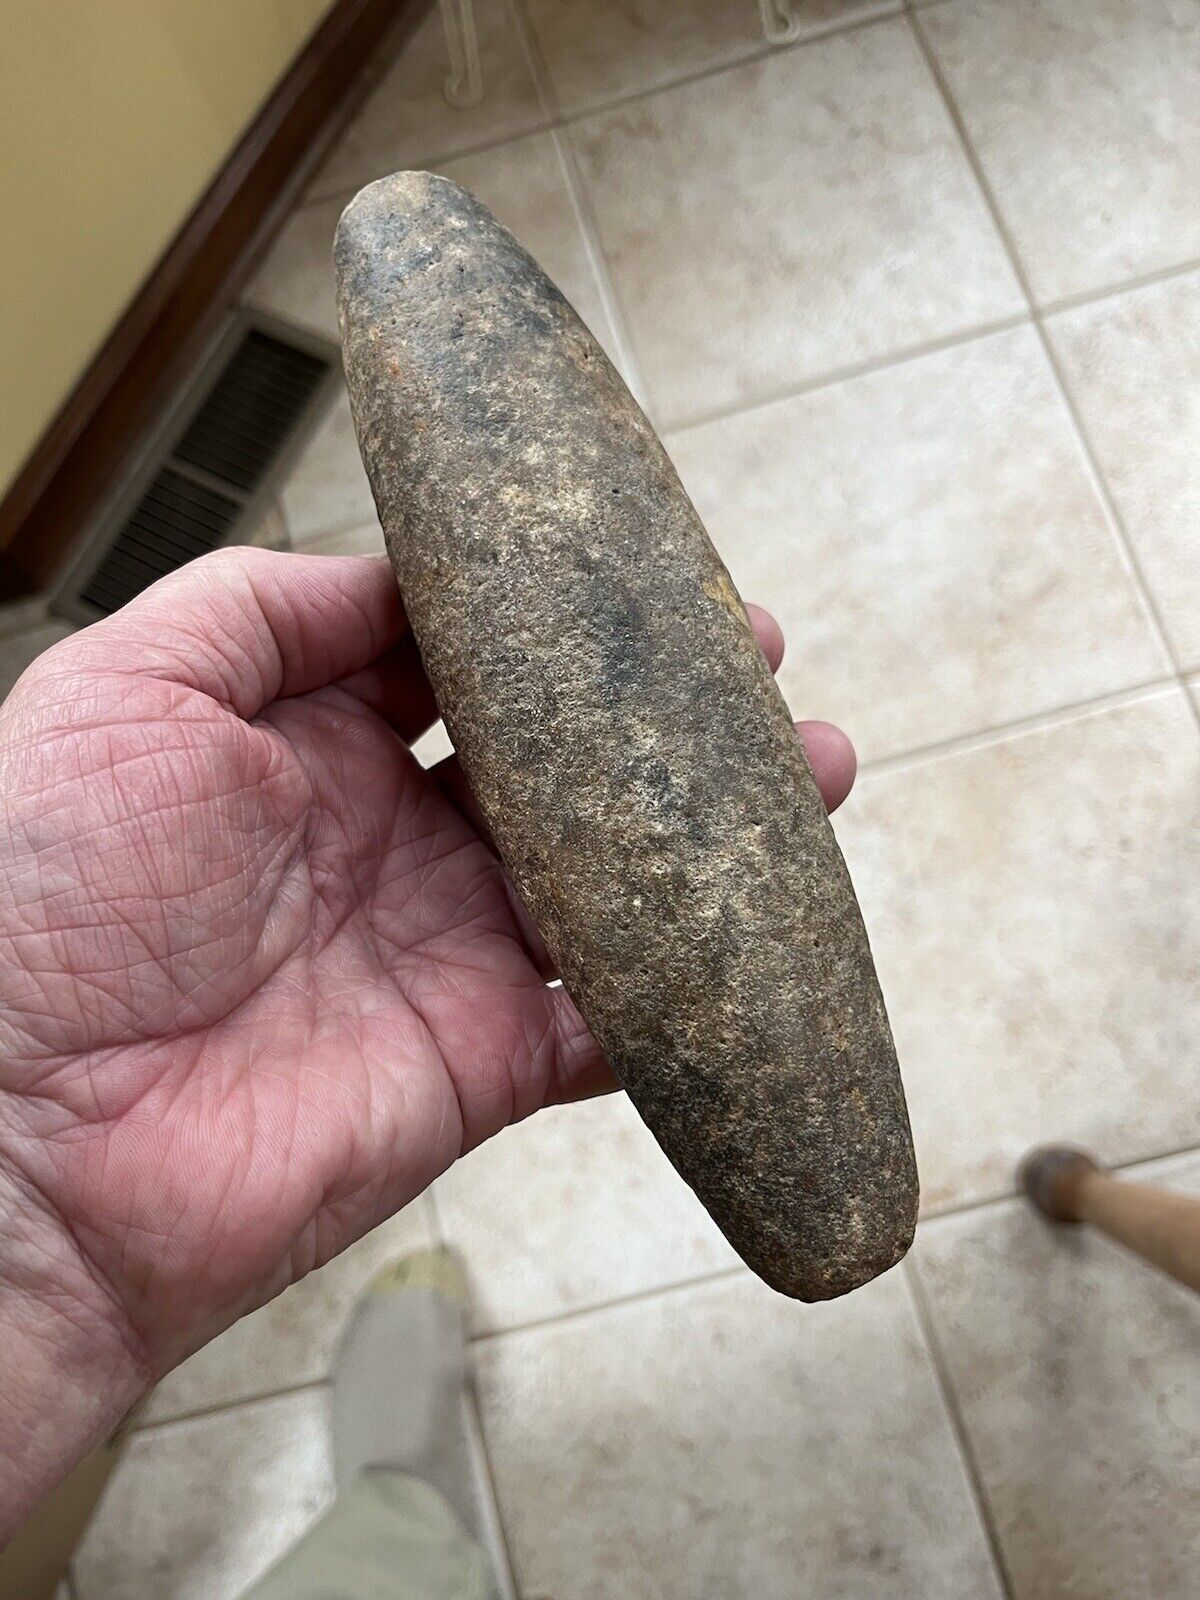 100% authentic Native American Pestle from California.